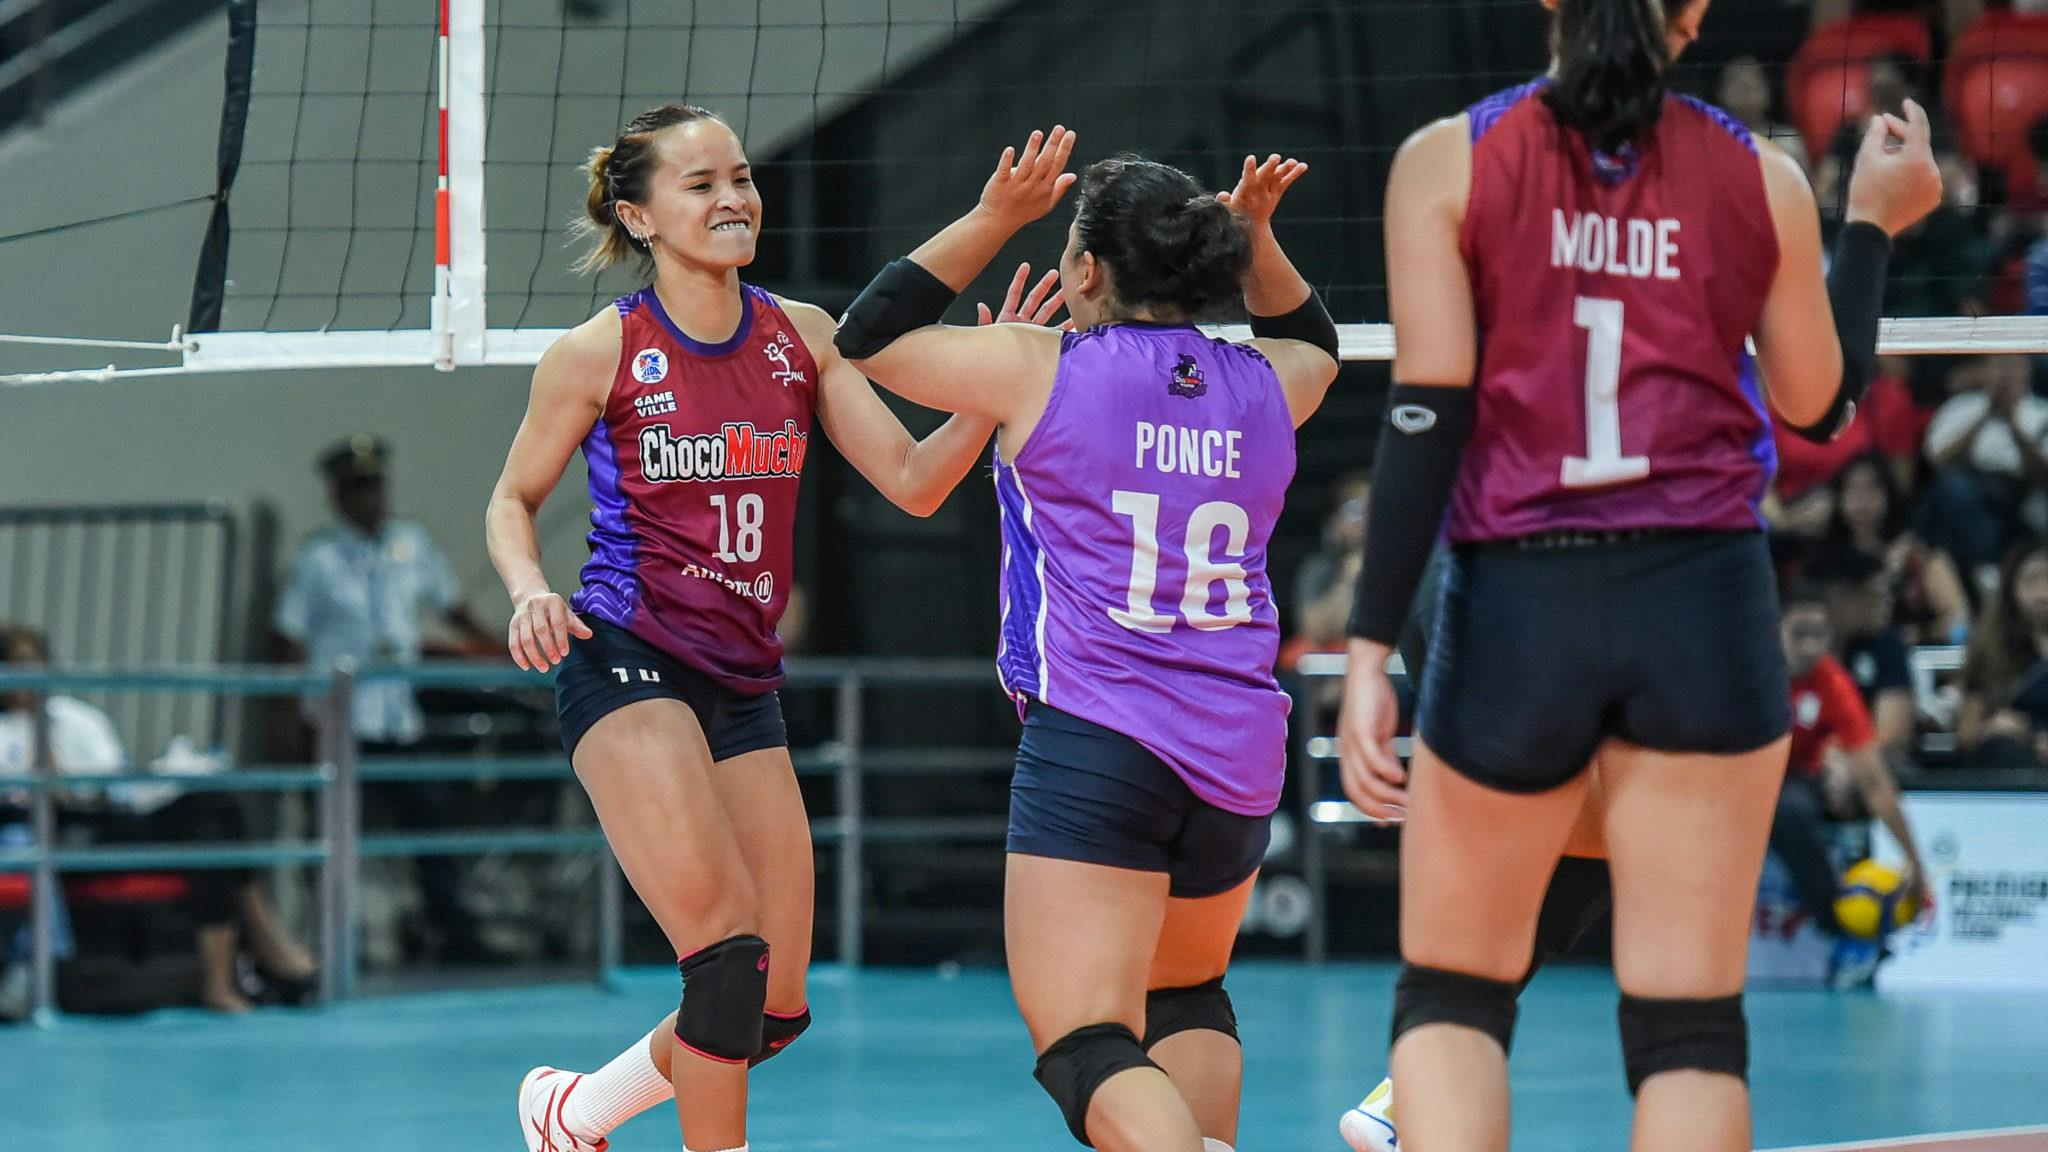 PVL: Choco Mucho and Sisi Rondina soar to number one, all the stats in All-Filipino Week 2